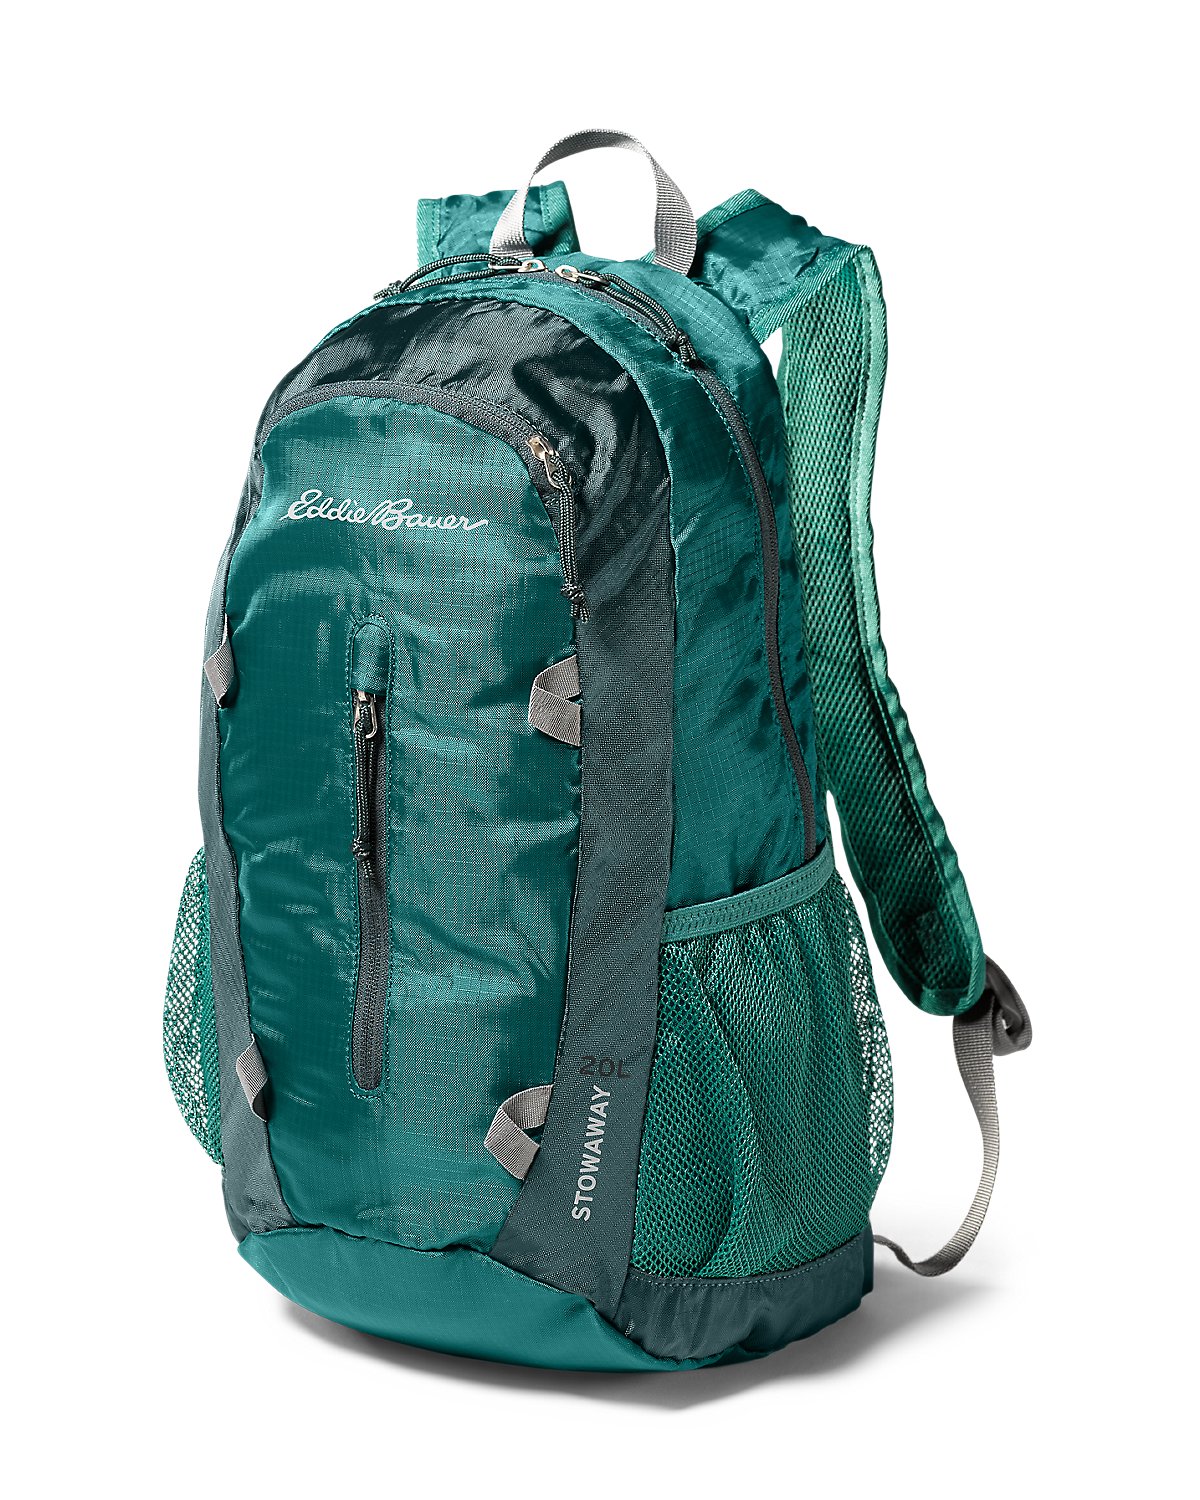 Eddie Bauer Packable 20 L Daypack Only $15 Shipped! (Reg $30)